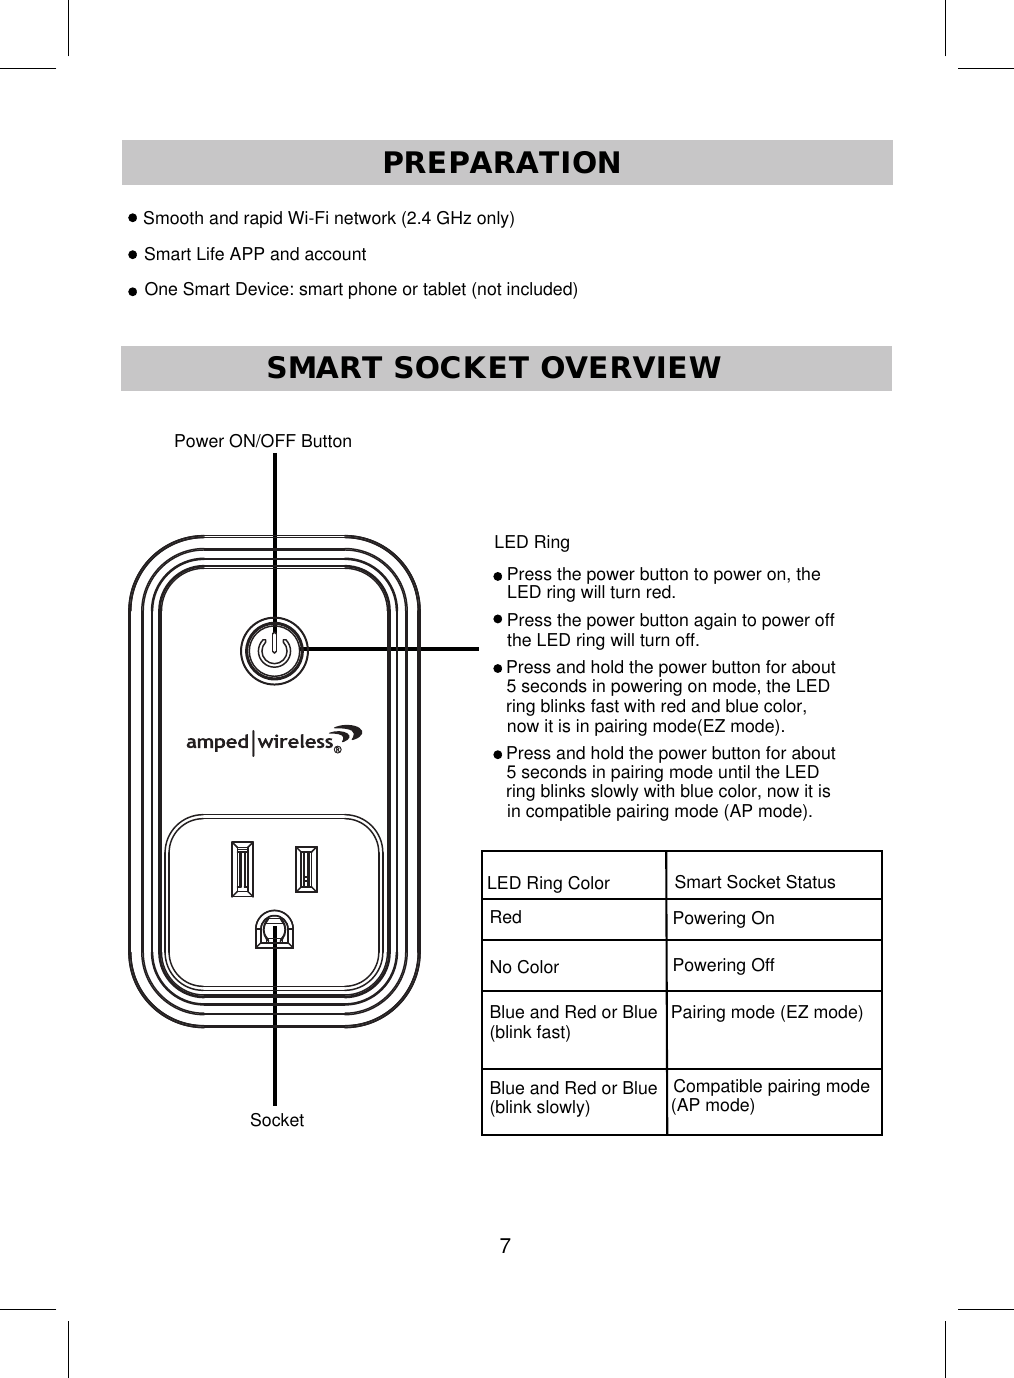 7SMART SOCKET OVERVIEW SocketPower ON/OFF ButtonLED RingPress and hold the power button for about 5 seconds in powering on mode, the LED   LED ring will turn red. Press the power button to power on, the Press the power button again to power offPREPARATION Smooth and rapid Wi-Fi network (2.4 GHz only)Smart Life APP and accountOne Smart Device: smart phone or tablet (not included)the LED ring will turn off. ring blinks fast with red and blue color, now it is in pairing mode(EZ mode).Press and hold the power button for about 5 seconds in pairing mode until the LED   ring blinks slowly with blue color, now it is in compatible pairing mode (AP mode).LED Ring Color Smart Socket StatusRed Powering OnNo Color Powering OffBlue and Red or Blue(blink fast) Pairing mode (EZ mode)Blue and Red or Blue(blink slowly) Compatible pairing mode(AP mode)